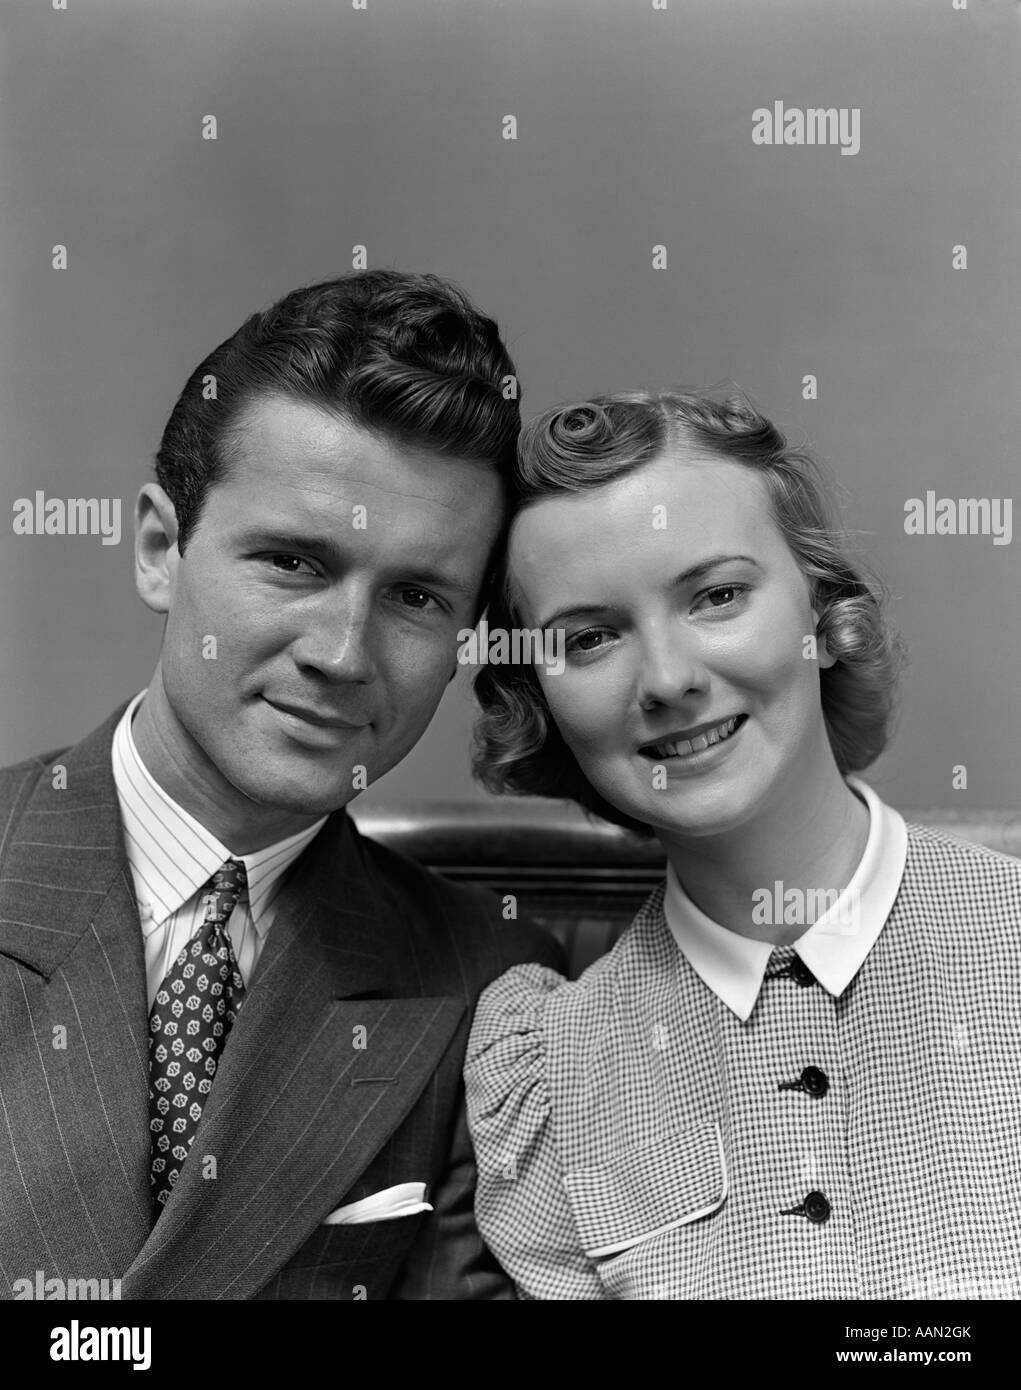 1930s 1940s PORTRAIT OF COUPLE LOOKING AT CAMERA Stock Photo